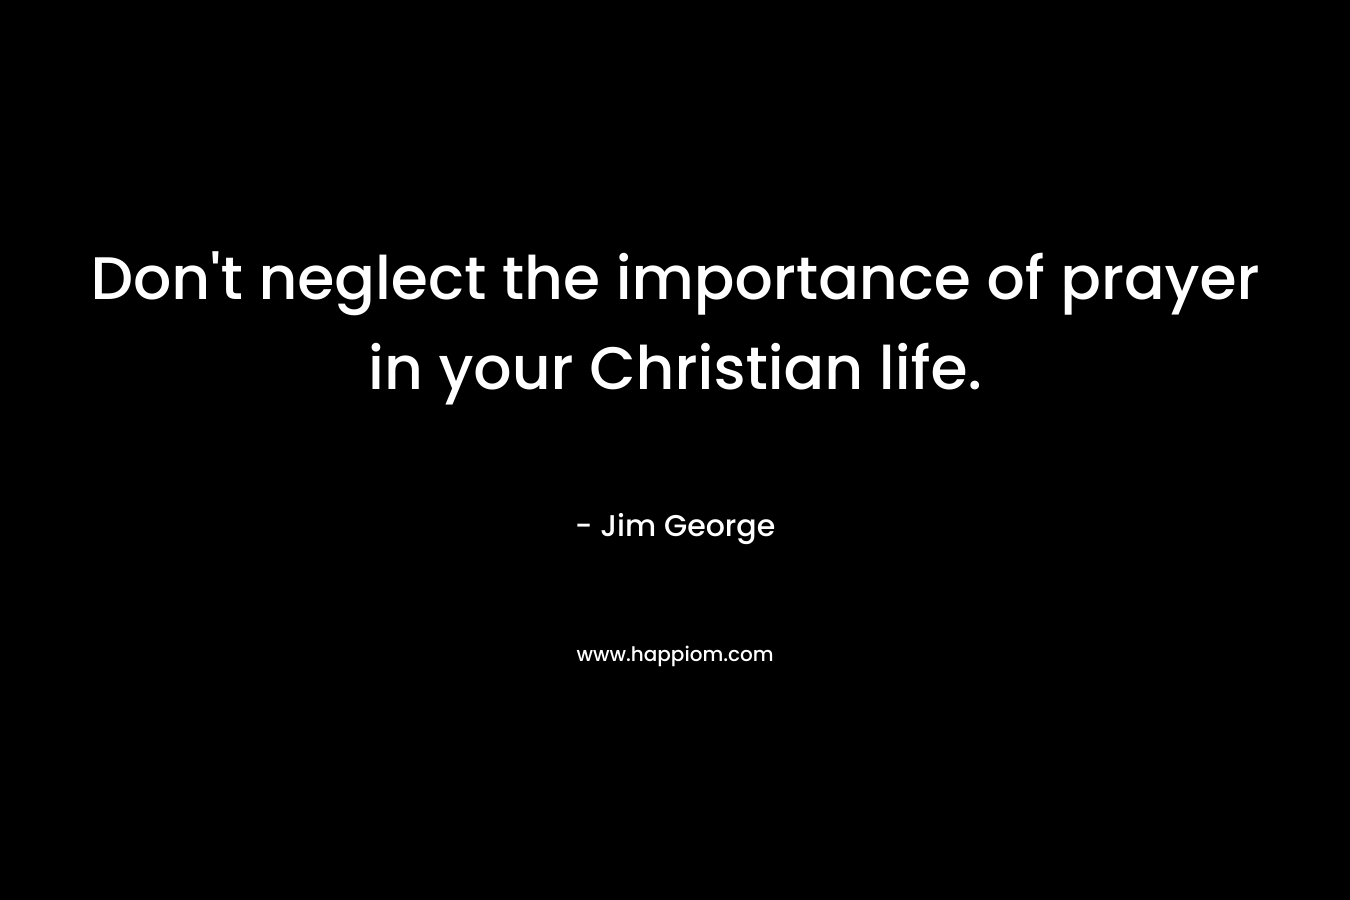 Don’t neglect the importance of prayer in your Christian life. – Jim George